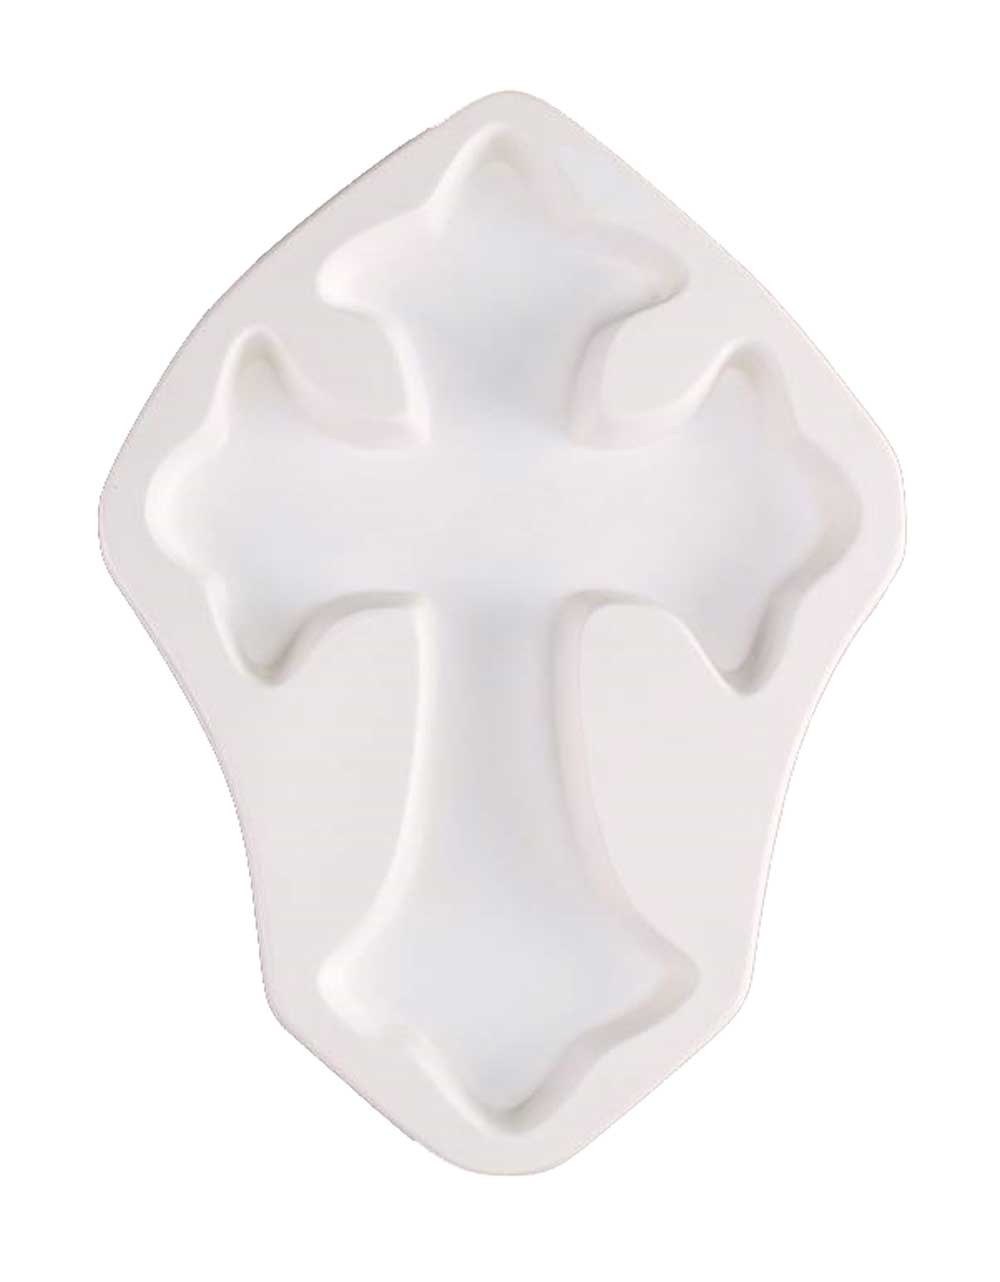 LARGE CROSS MOLD by CPI